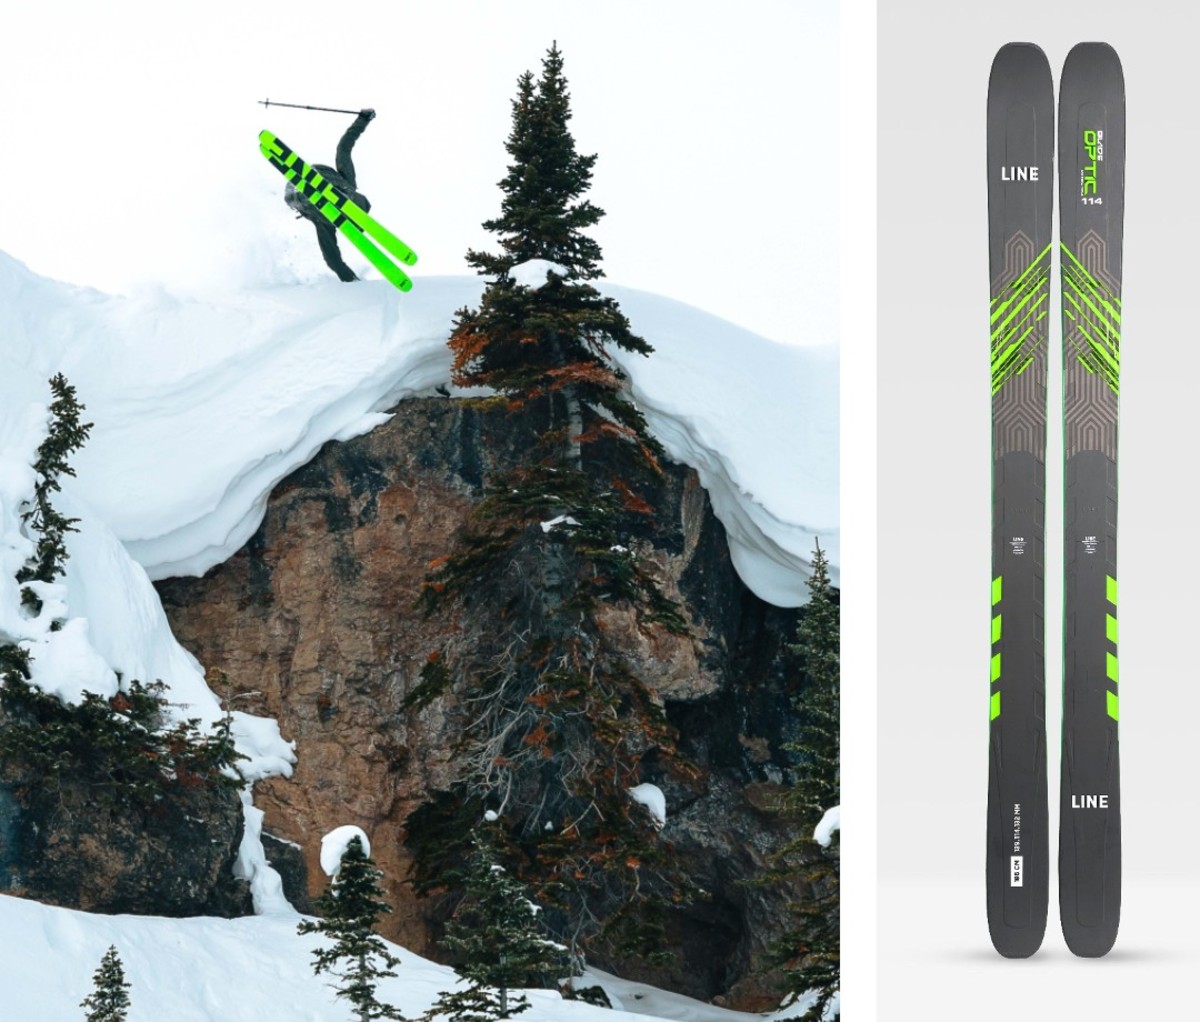 Skier doing jump with neon green skis